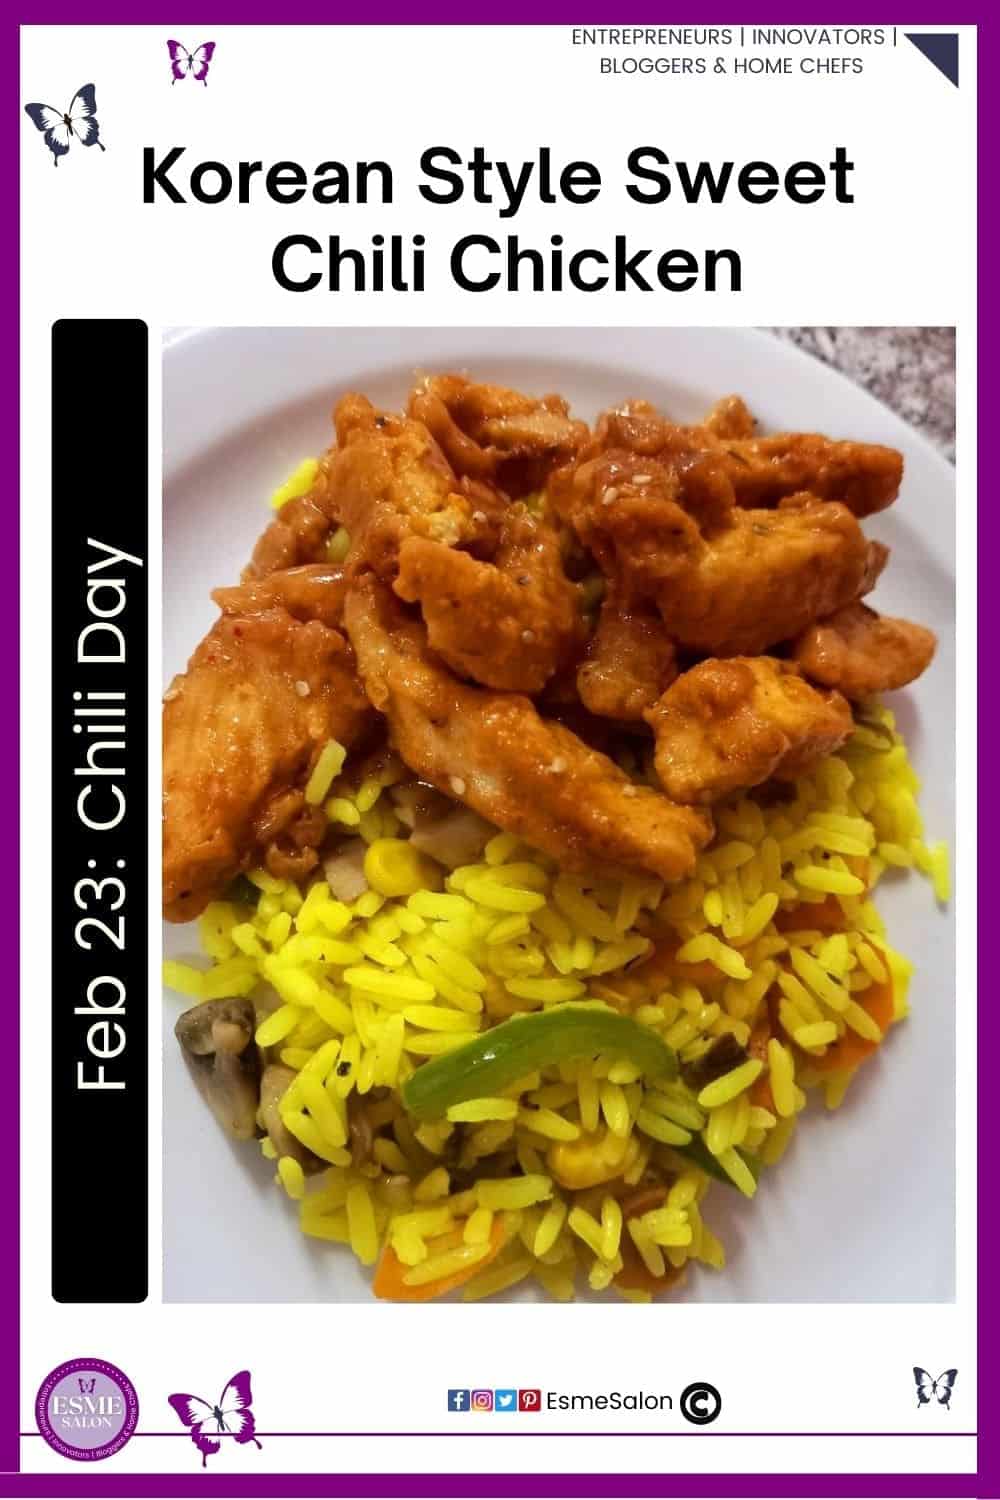 an image of Korean Style Sweet Chili Chicken plated and with yellow rice and veggies